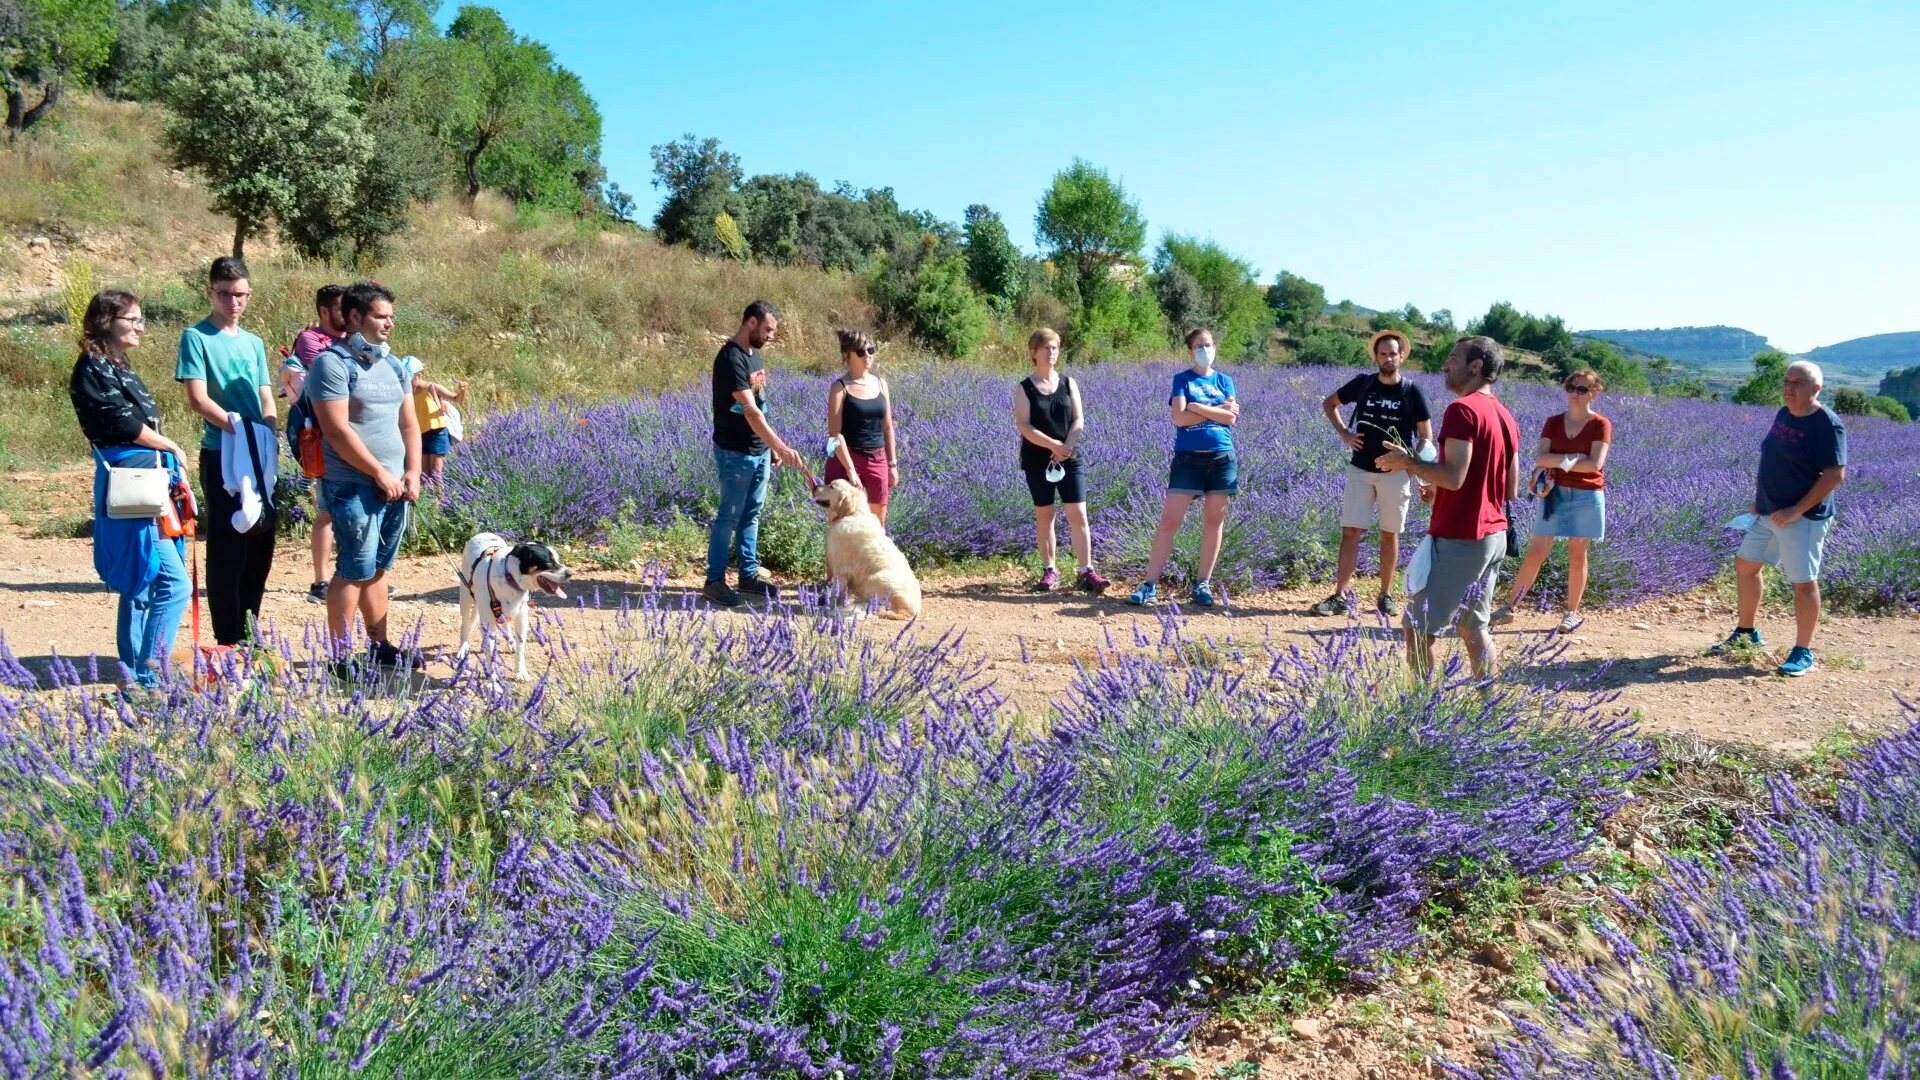 VISITS TO LAVENDER FIELDS